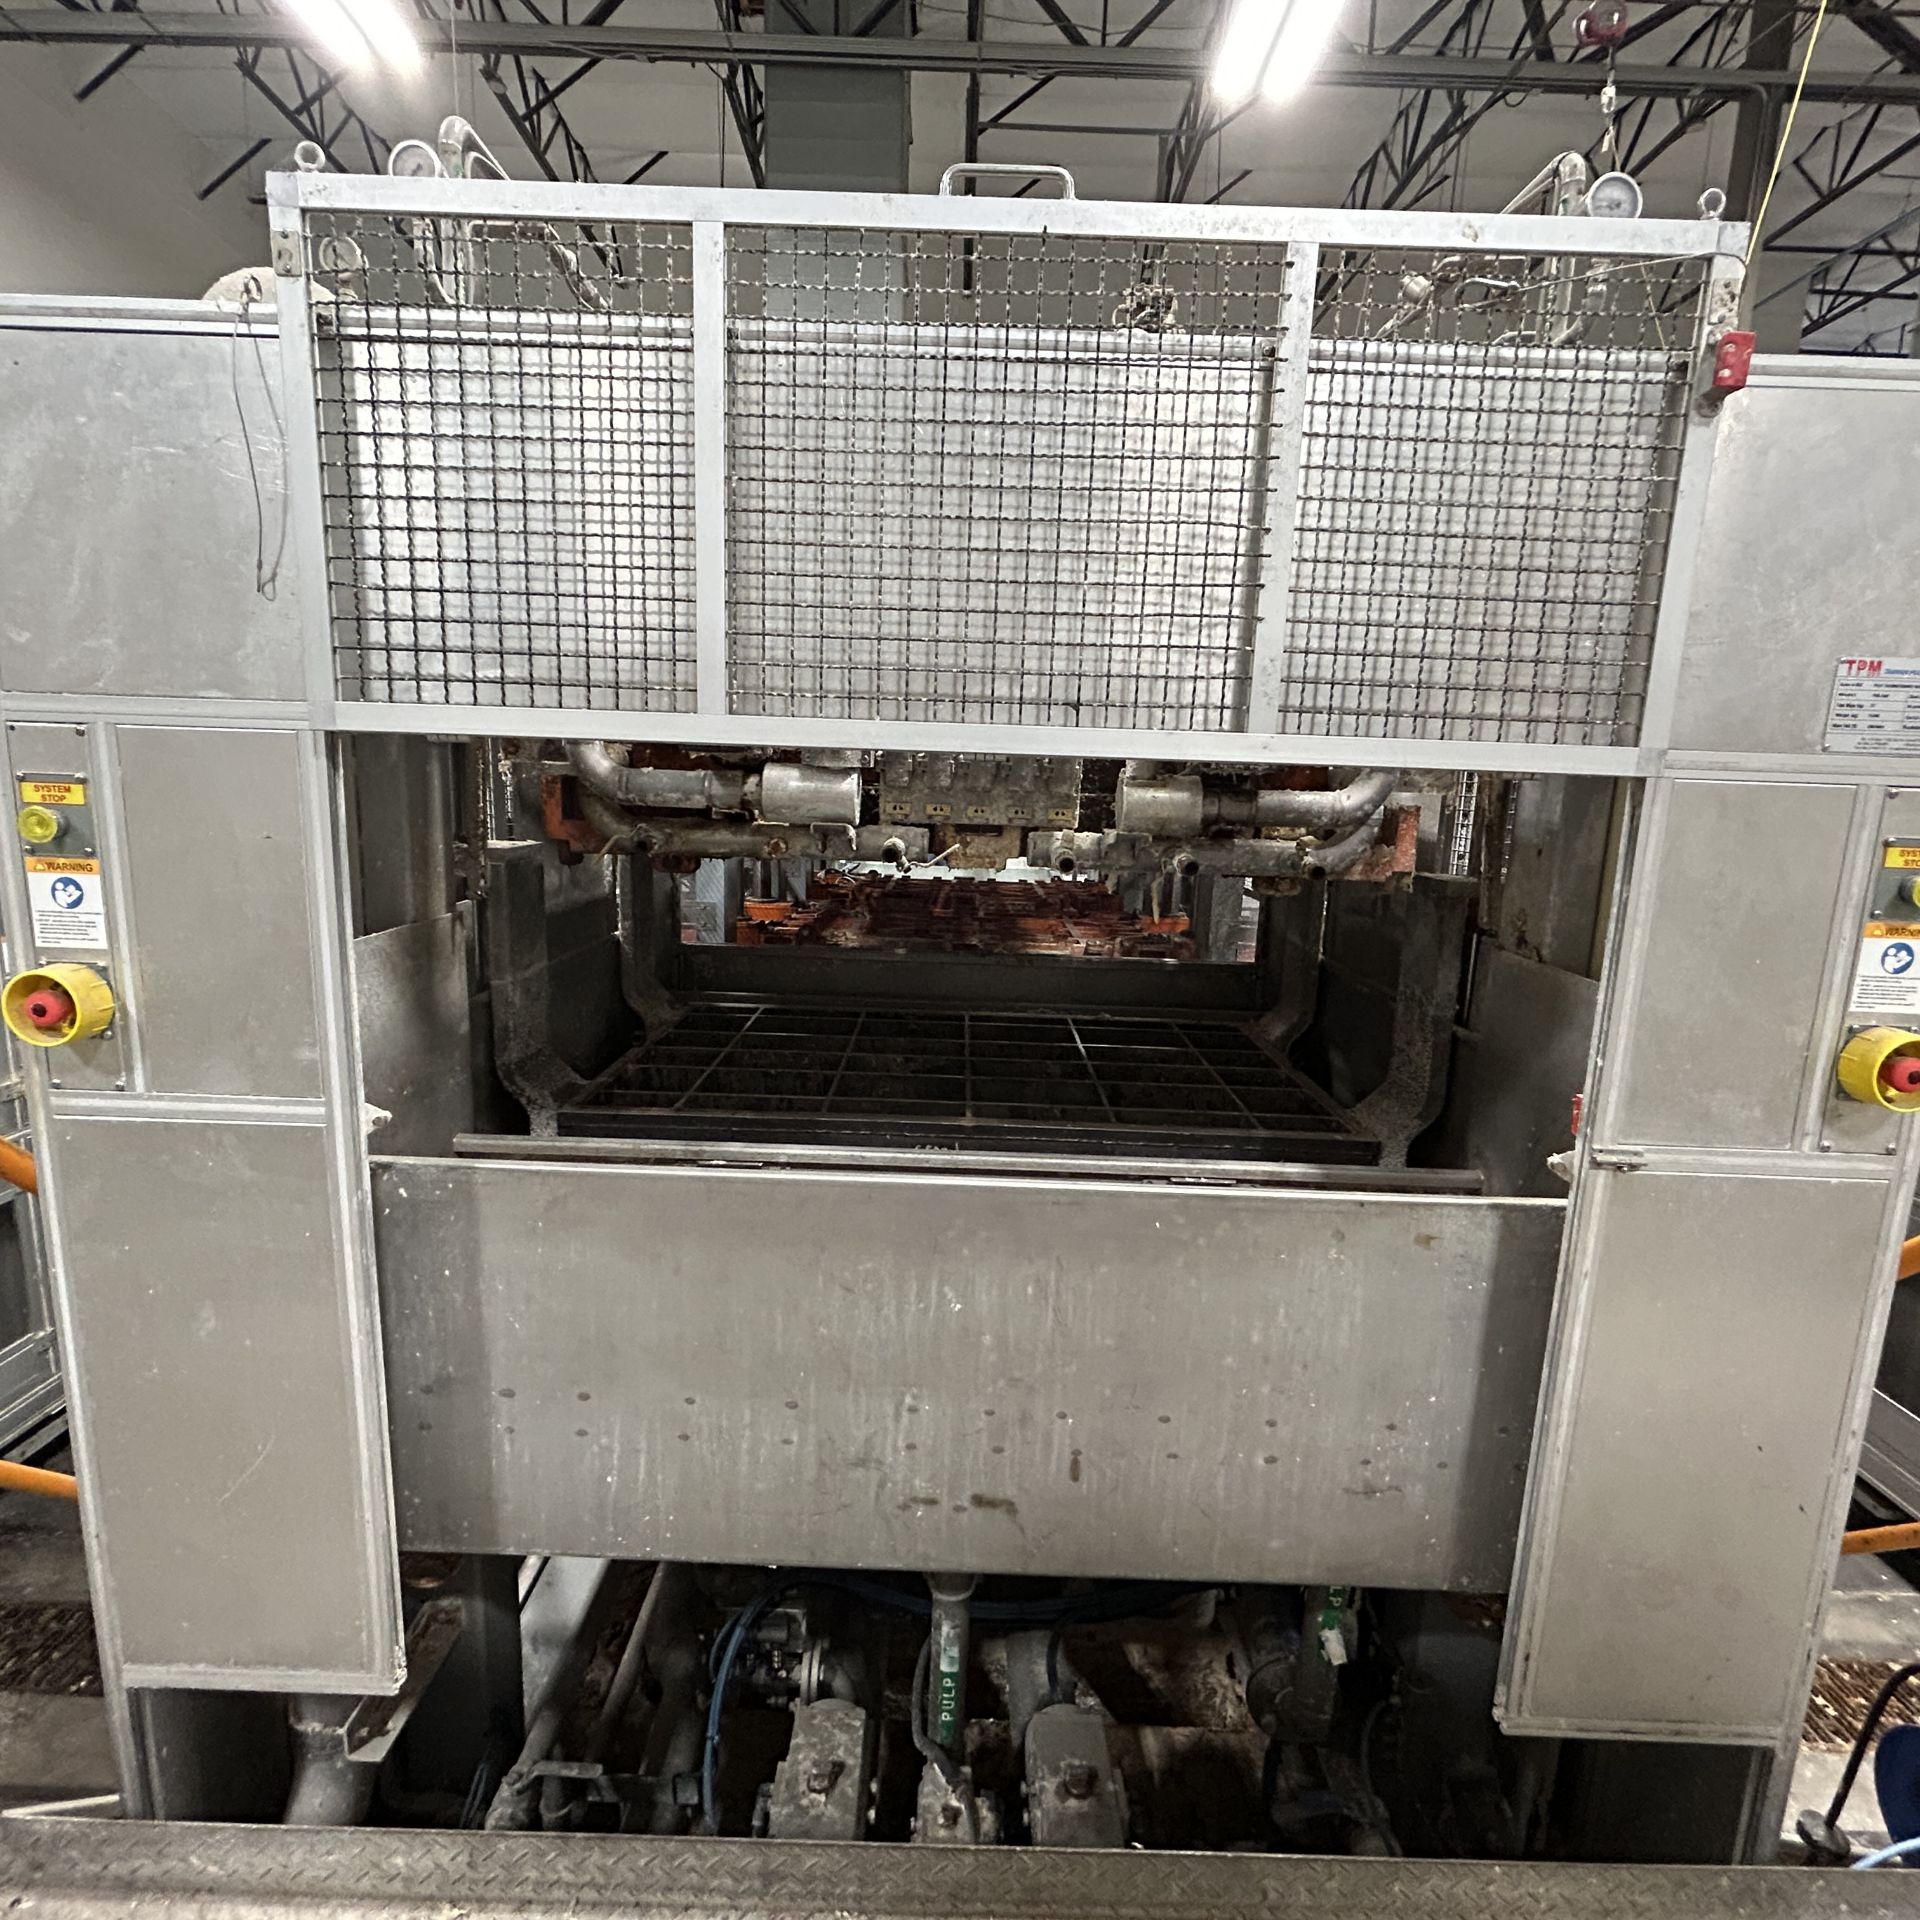 TPM-1500 3-Stage Pulp Thermoforming Machine Equipped With (1) 2018 TPM-AS-1500 2-Stage Auto Stacker - Image 20 of 35